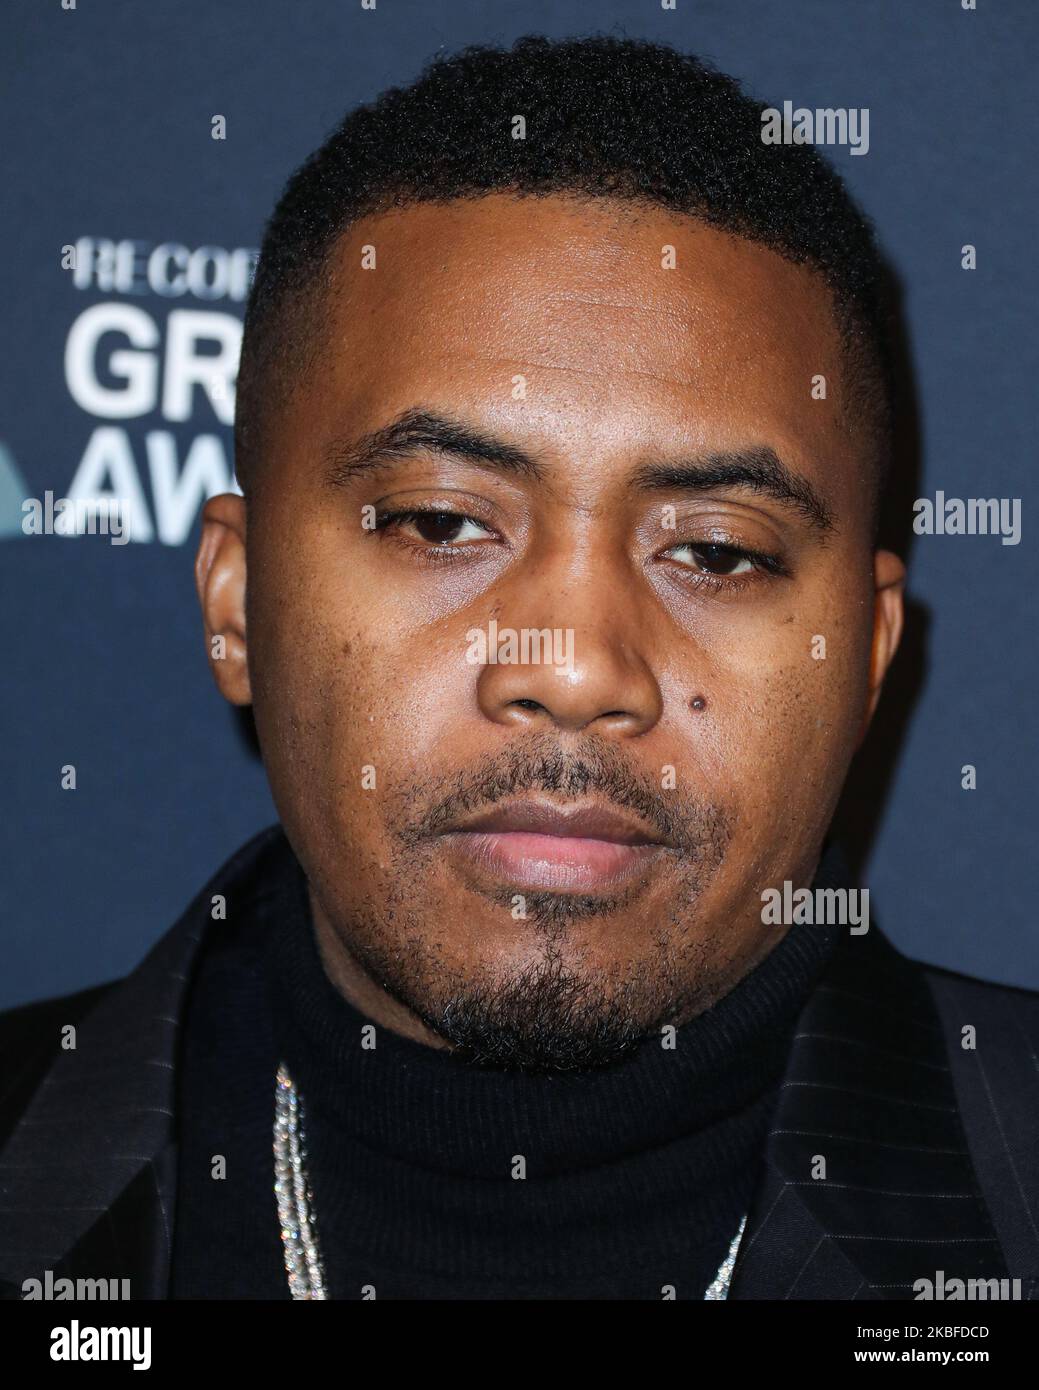 BEVERLY HILLS, LOS ANGELES, CALIFORNIA, USA - JANUARY 25: Nas arrives at The Recording Academy And Clive Davis' 2020 Pre-GRAMMY Gala held at The Beverly Hilton Hotel on January 25, 2020 in Beverly Hills, Los Angeles, California, United States. (Photo by Xavier Collin/Image Press Agency/NurPhoto) Stock Photo